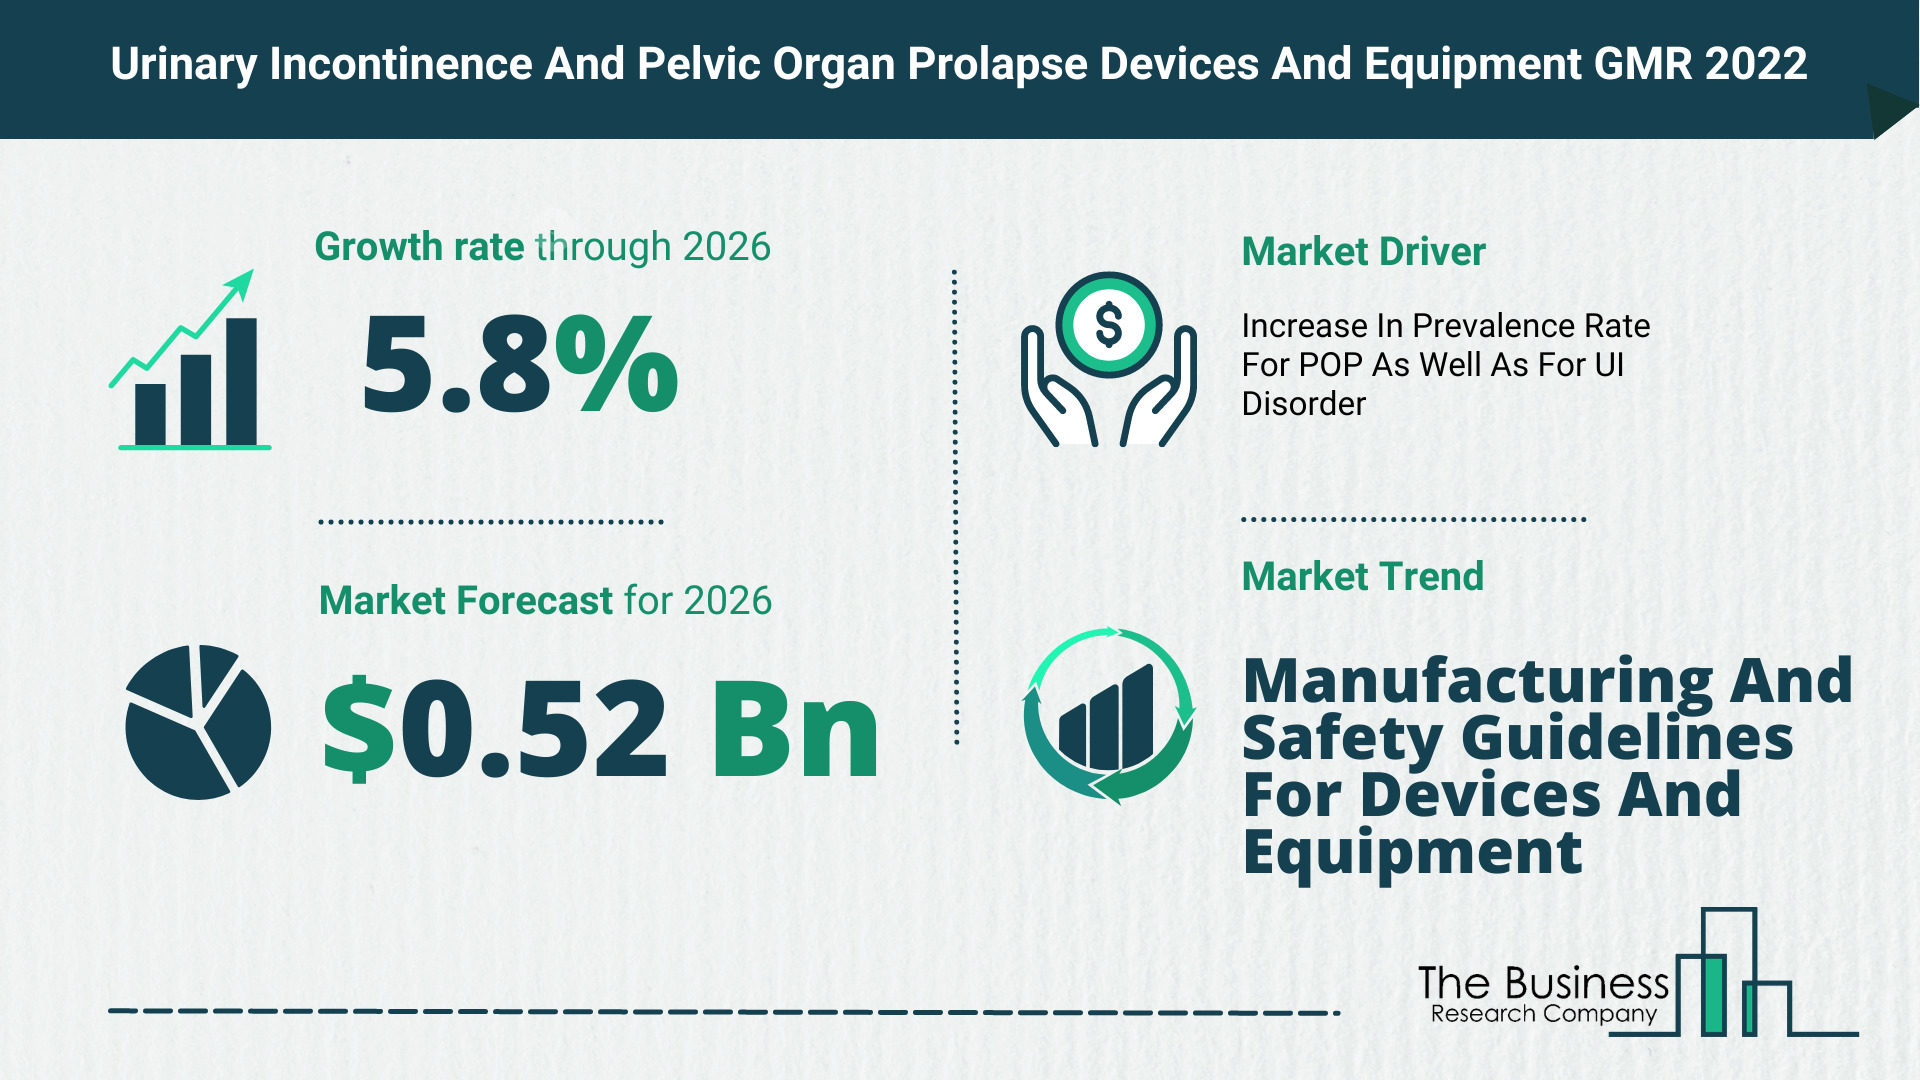 Global Urinary Incontinence And Pelvic Organ Prolapse Devices And Equipment Market